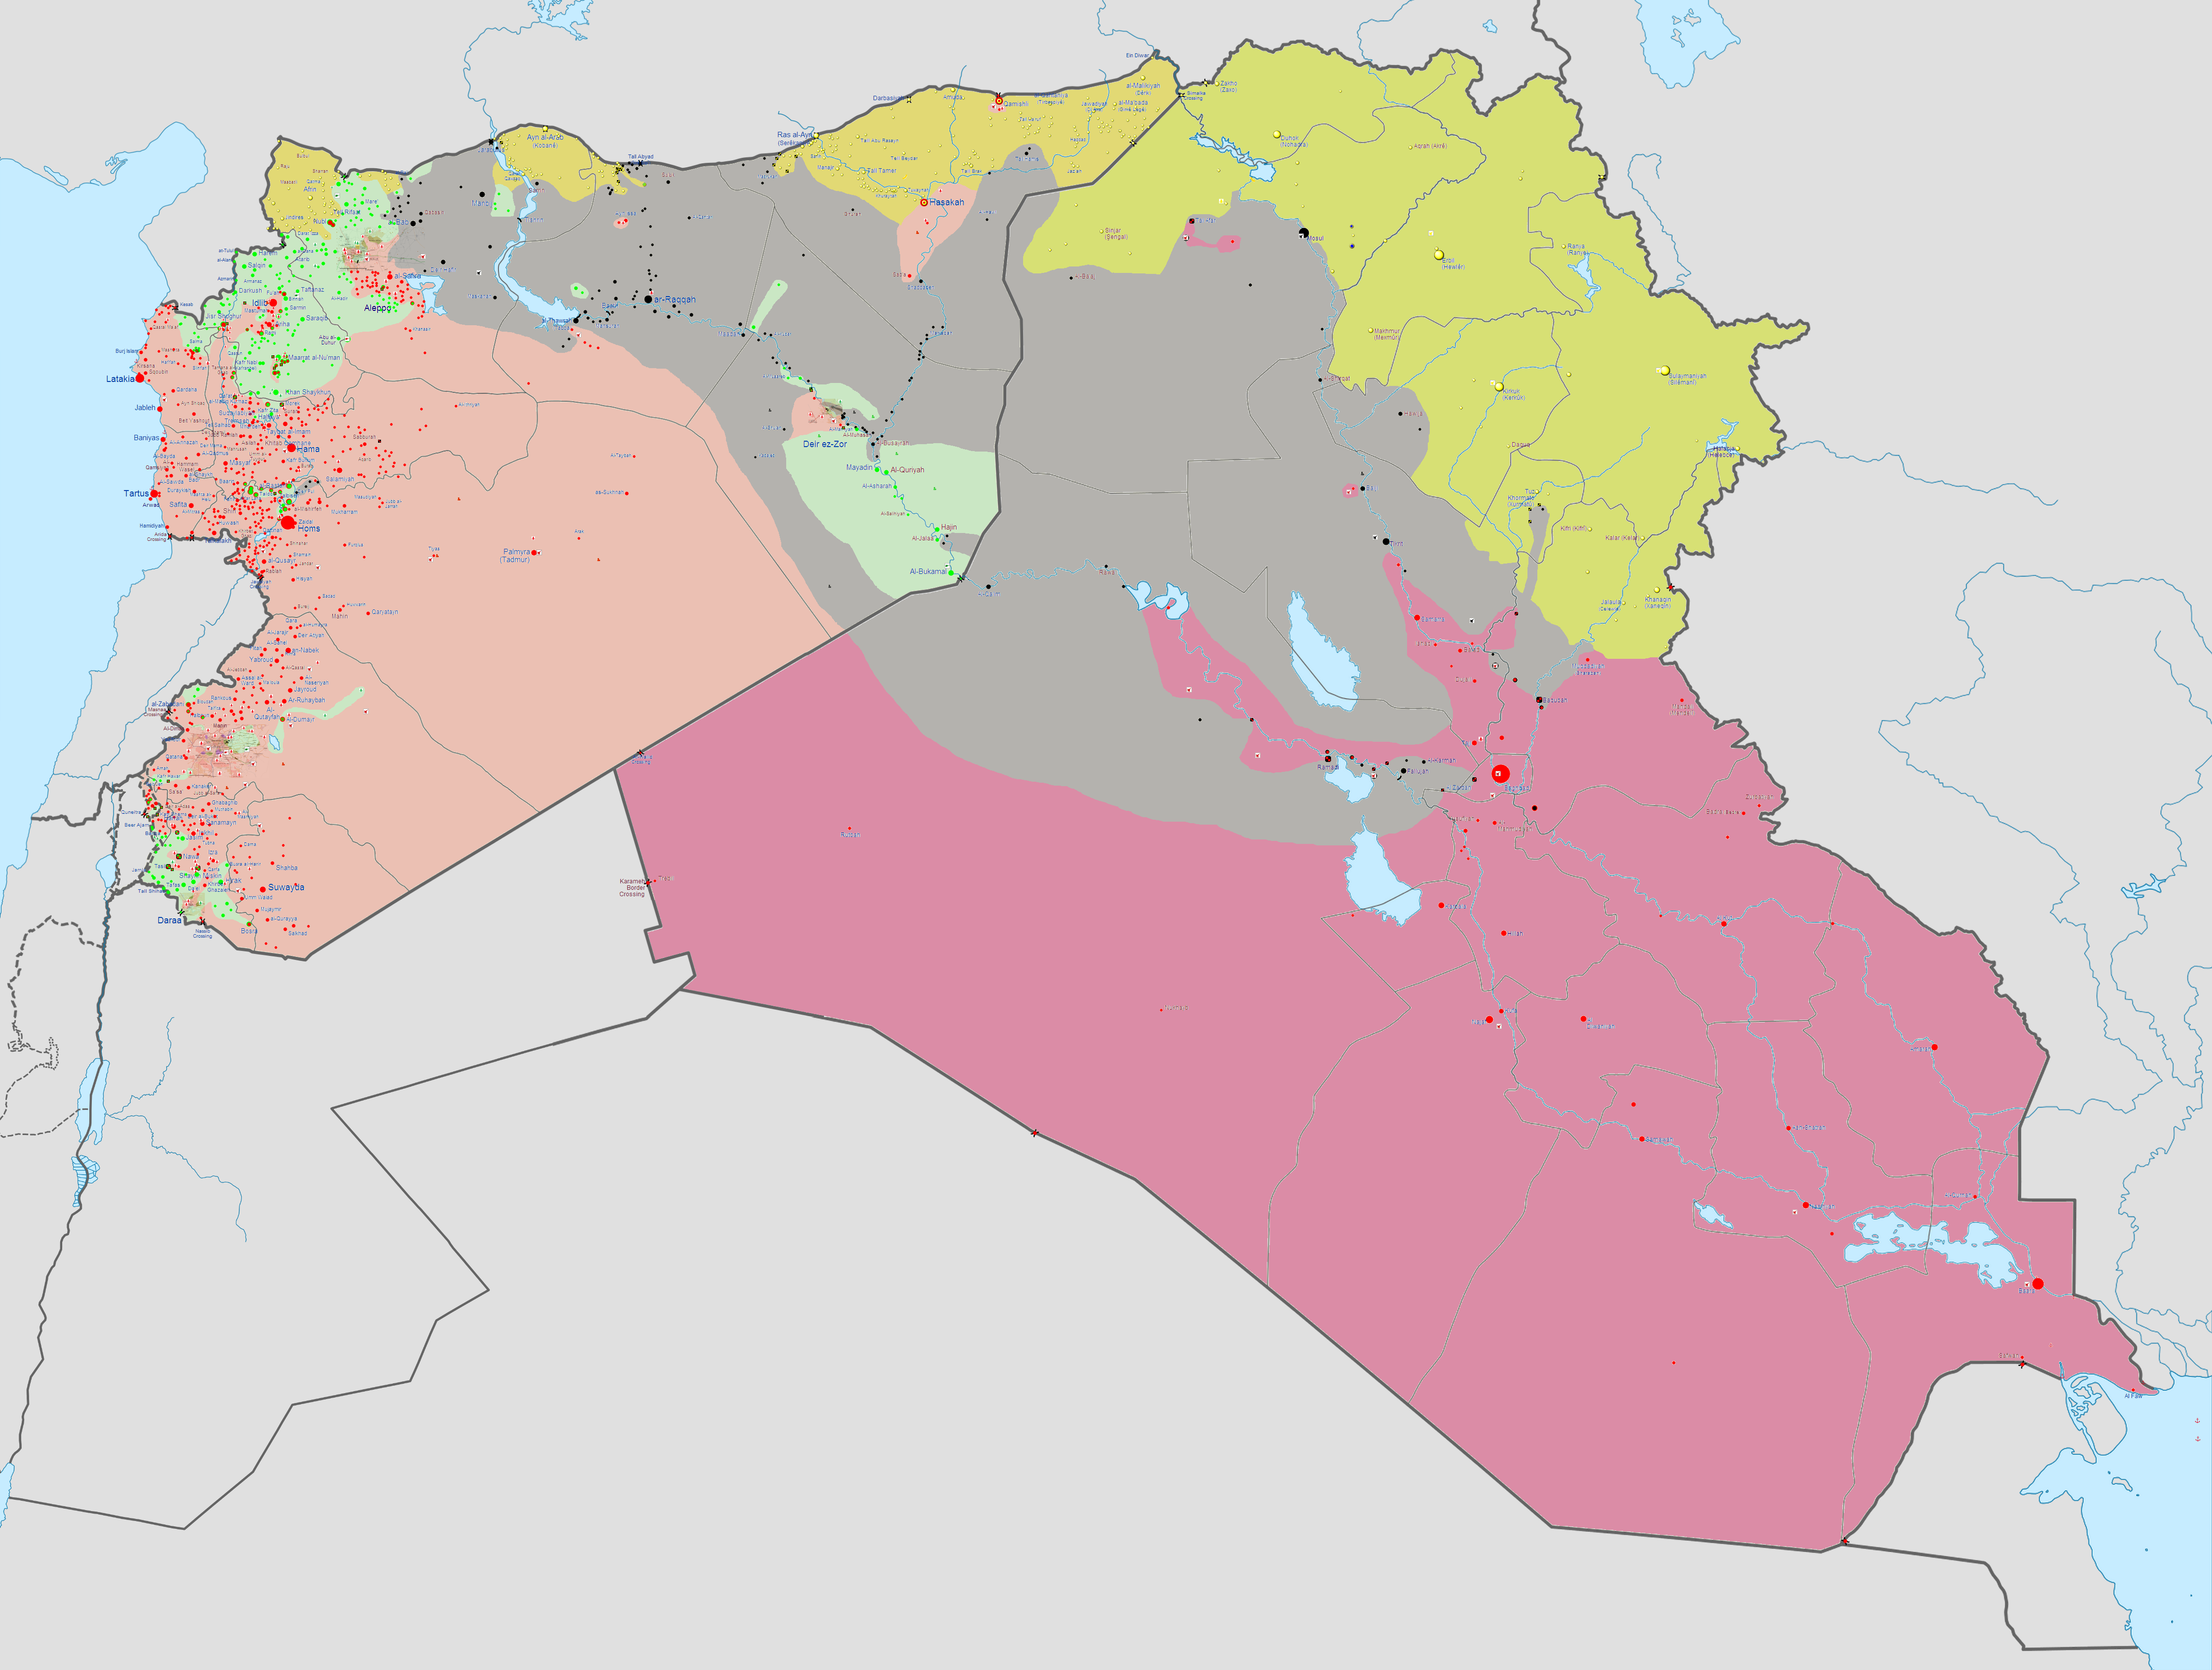 Map showing Syria and Iraq under ISIS control (grey areas).